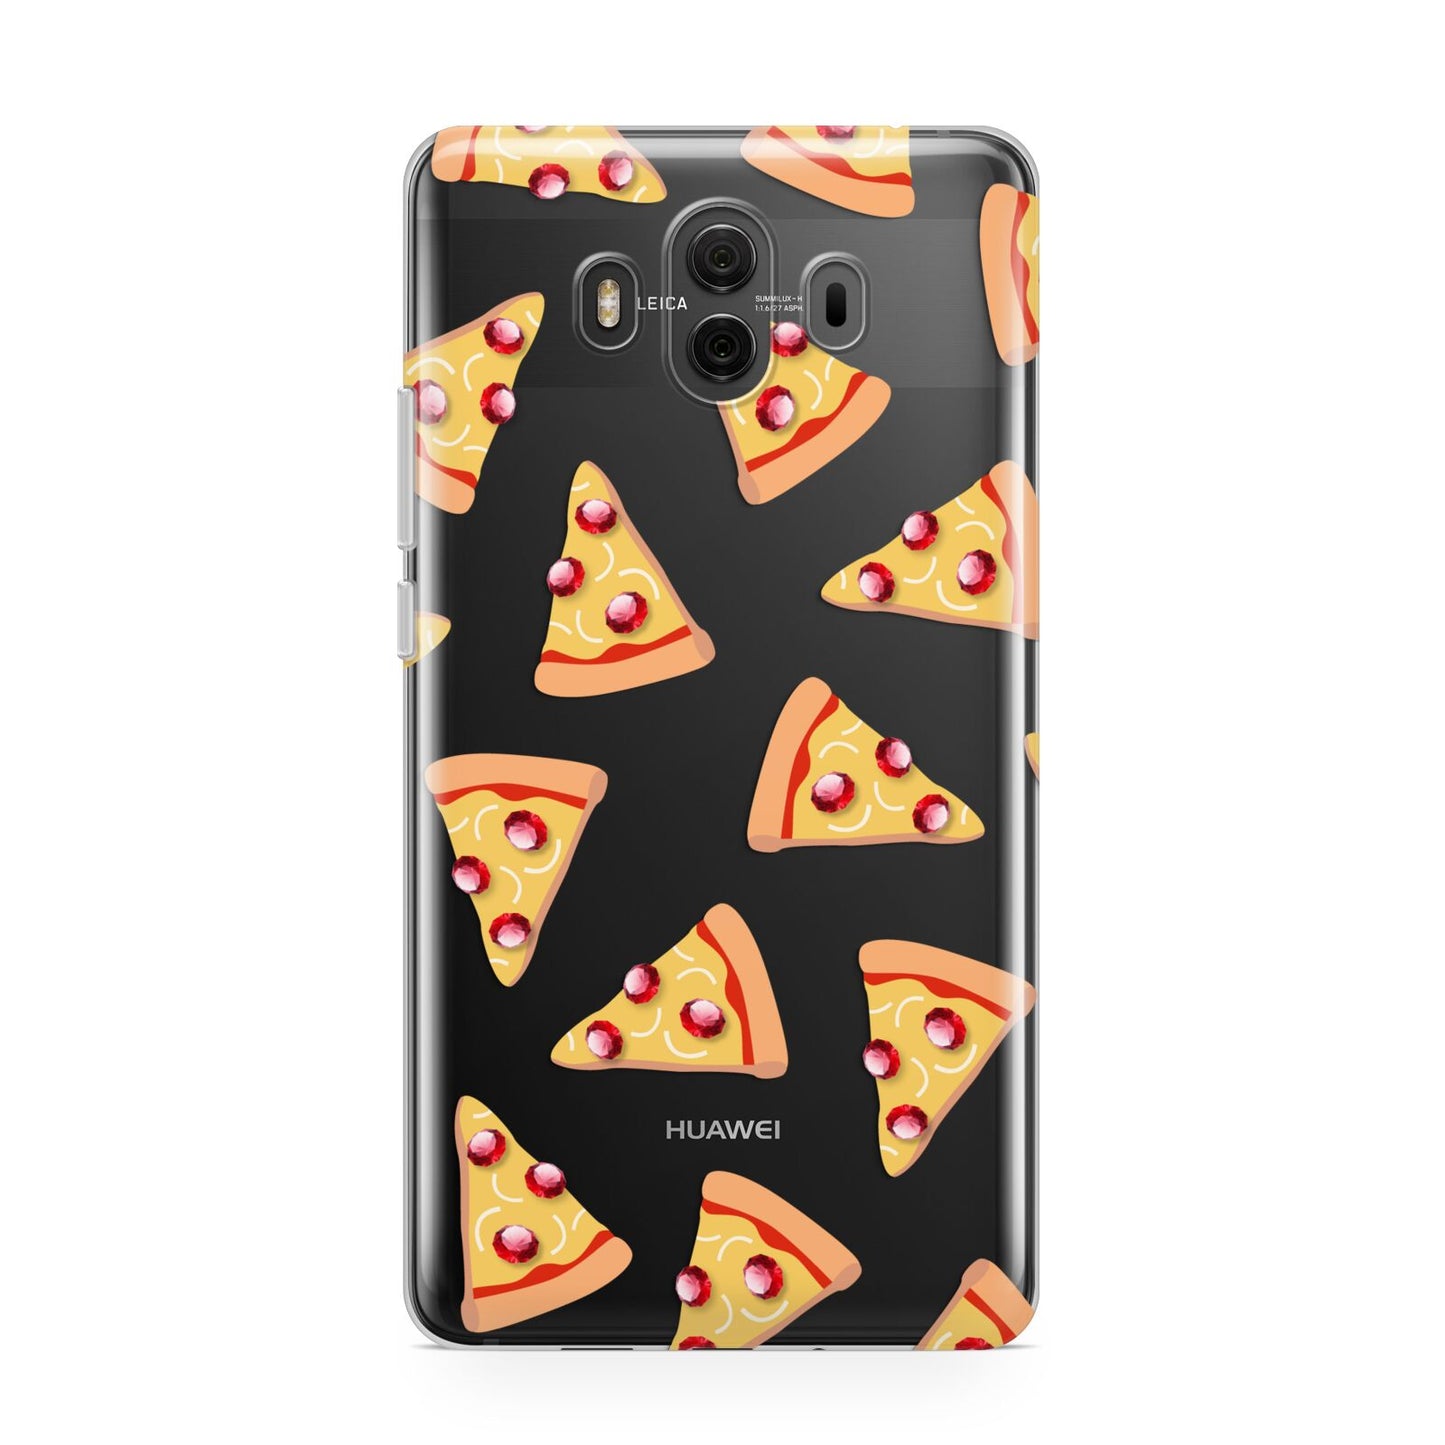 Rubies on Cartoon Pizza Slices Huawei Mate 10 Protective Phone Case